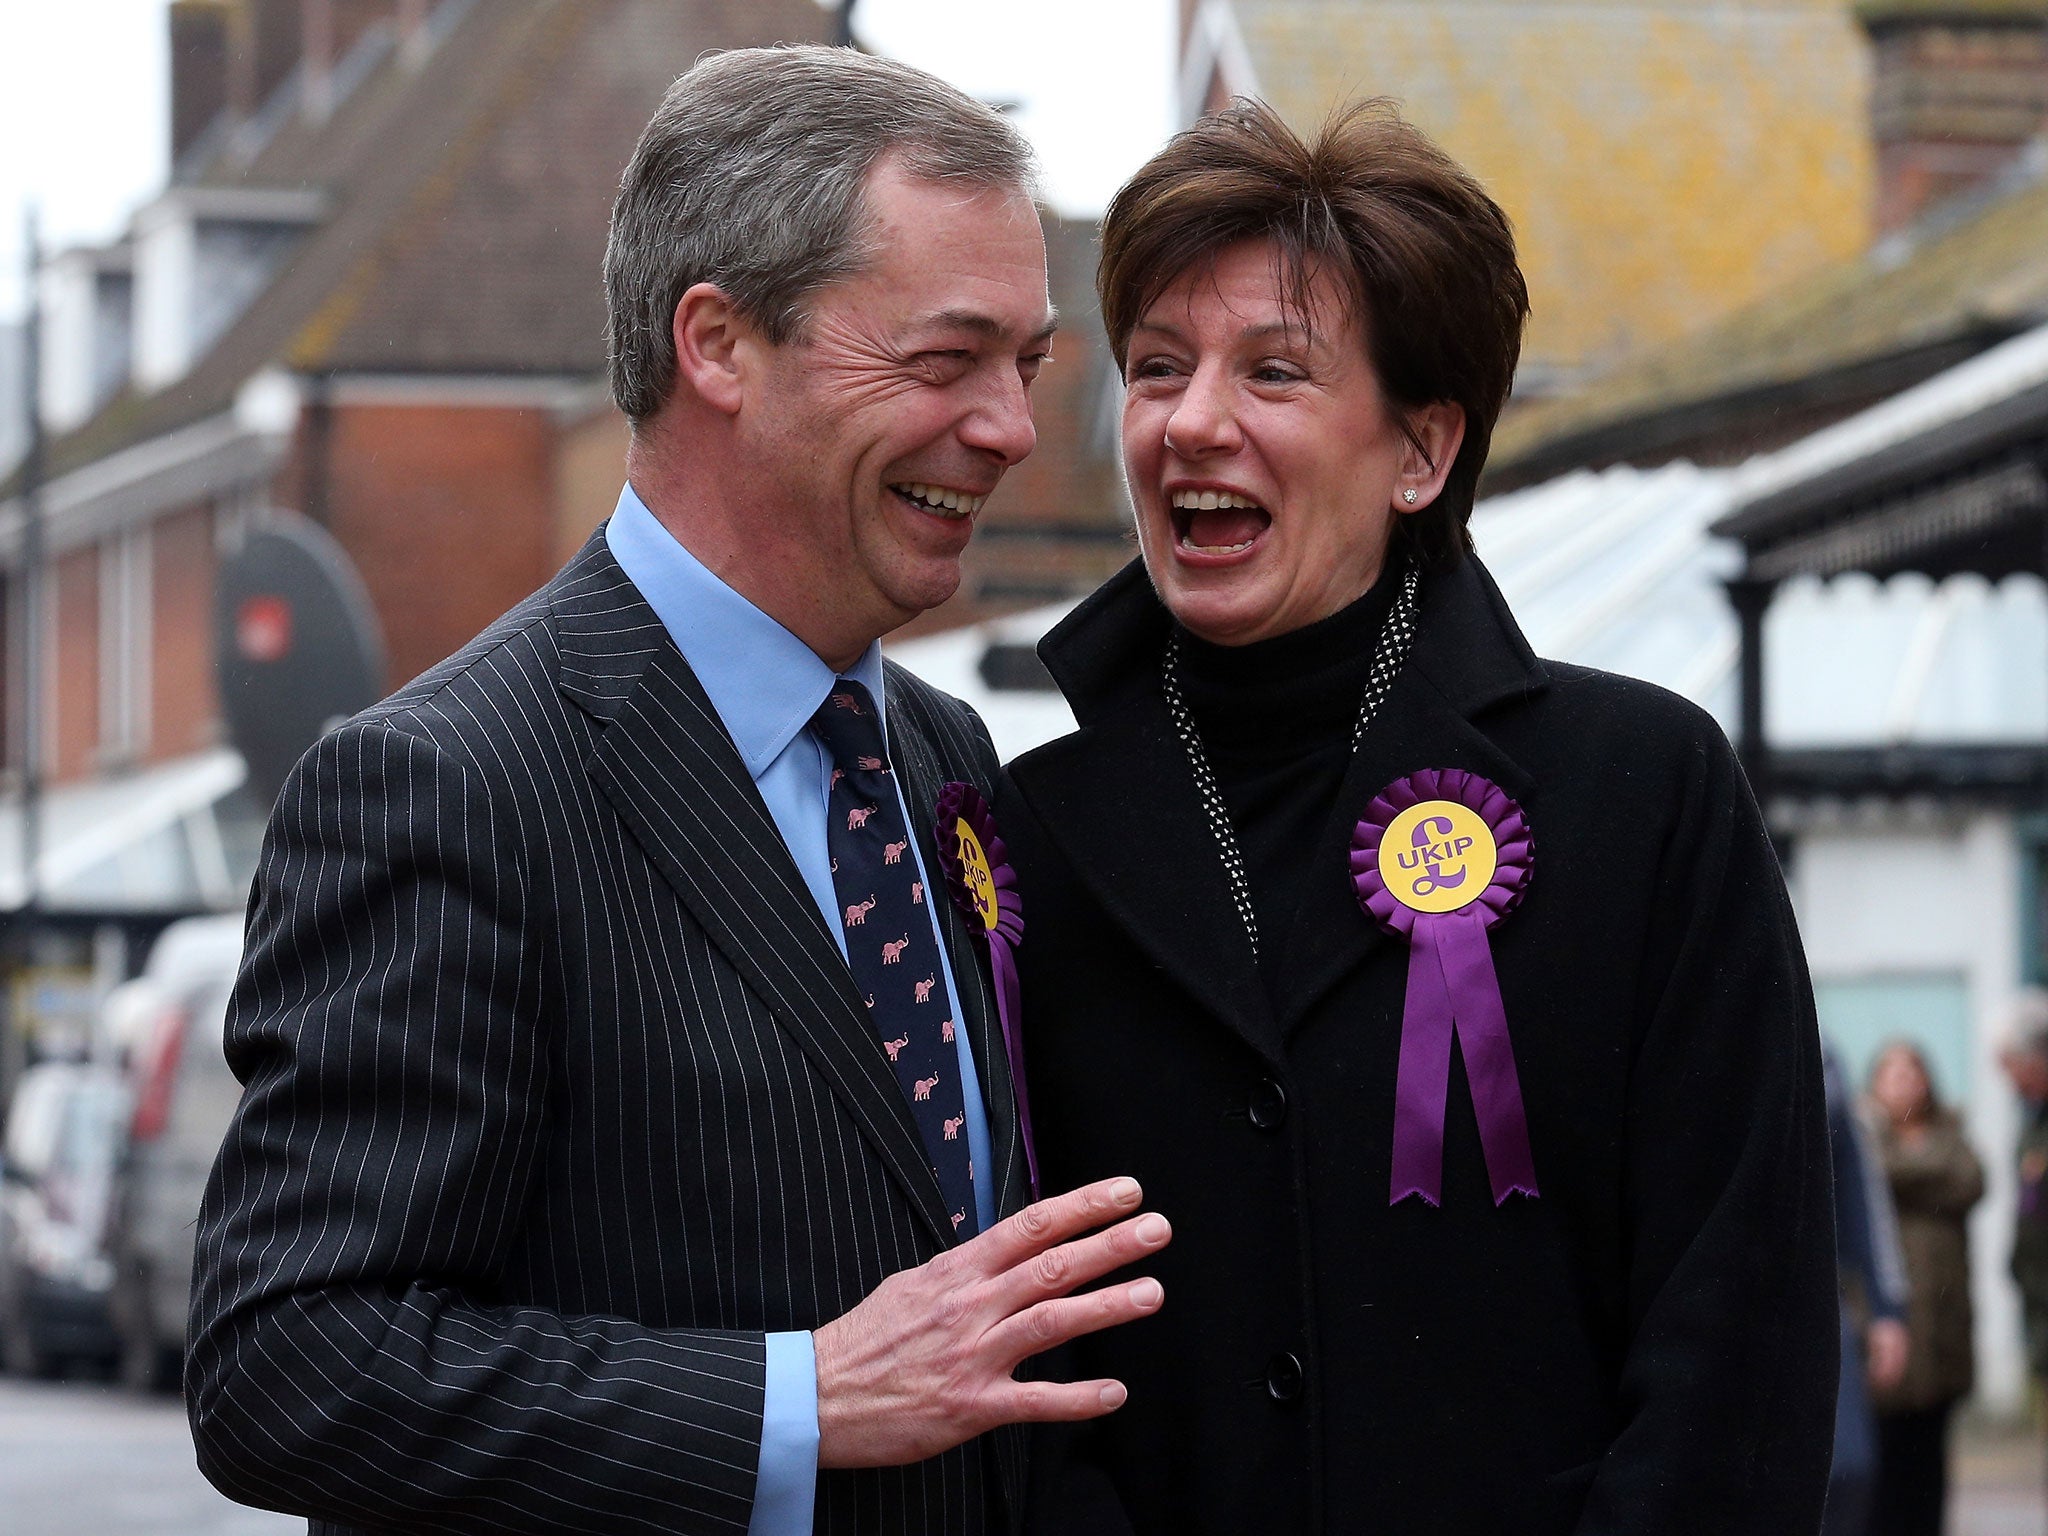 Diane James, right, dismissed suggestions that the party would be fatally damaged if Nigel Farage, left, stood down as leader